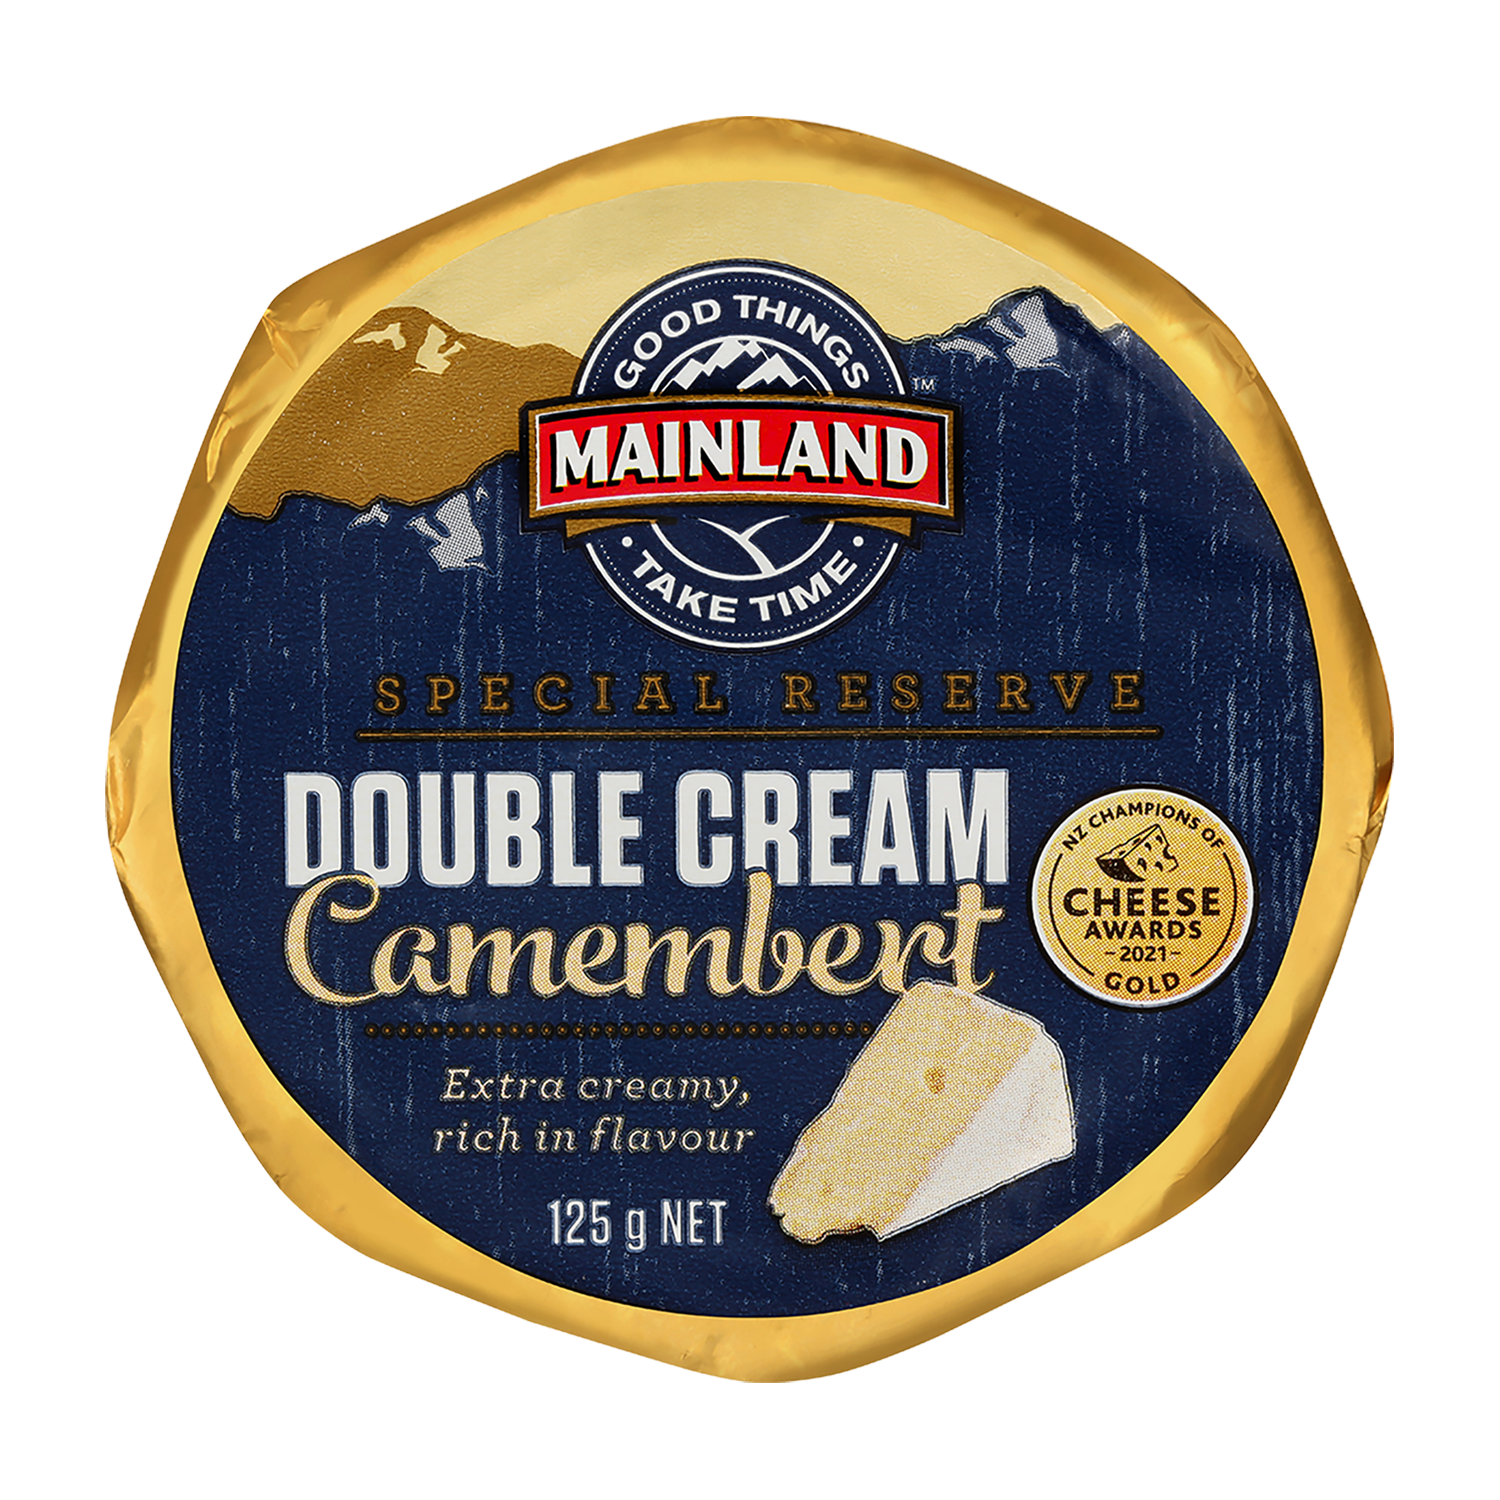 Mainland Special Reserve Double Cream Camembert Cheese 125g*